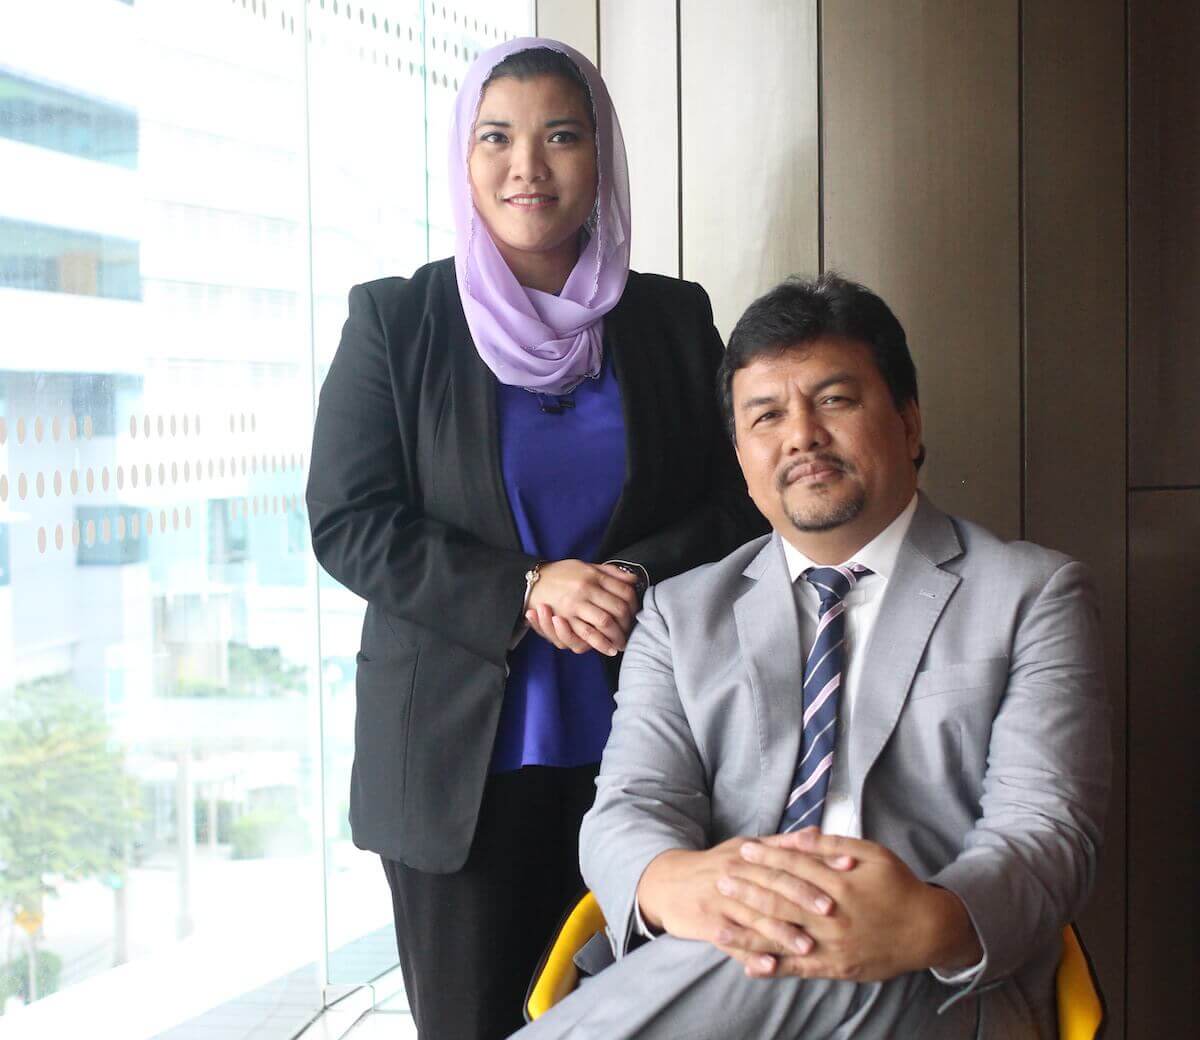 EDUCATION: Family-owned businesses in Malaysia – Growth and Education